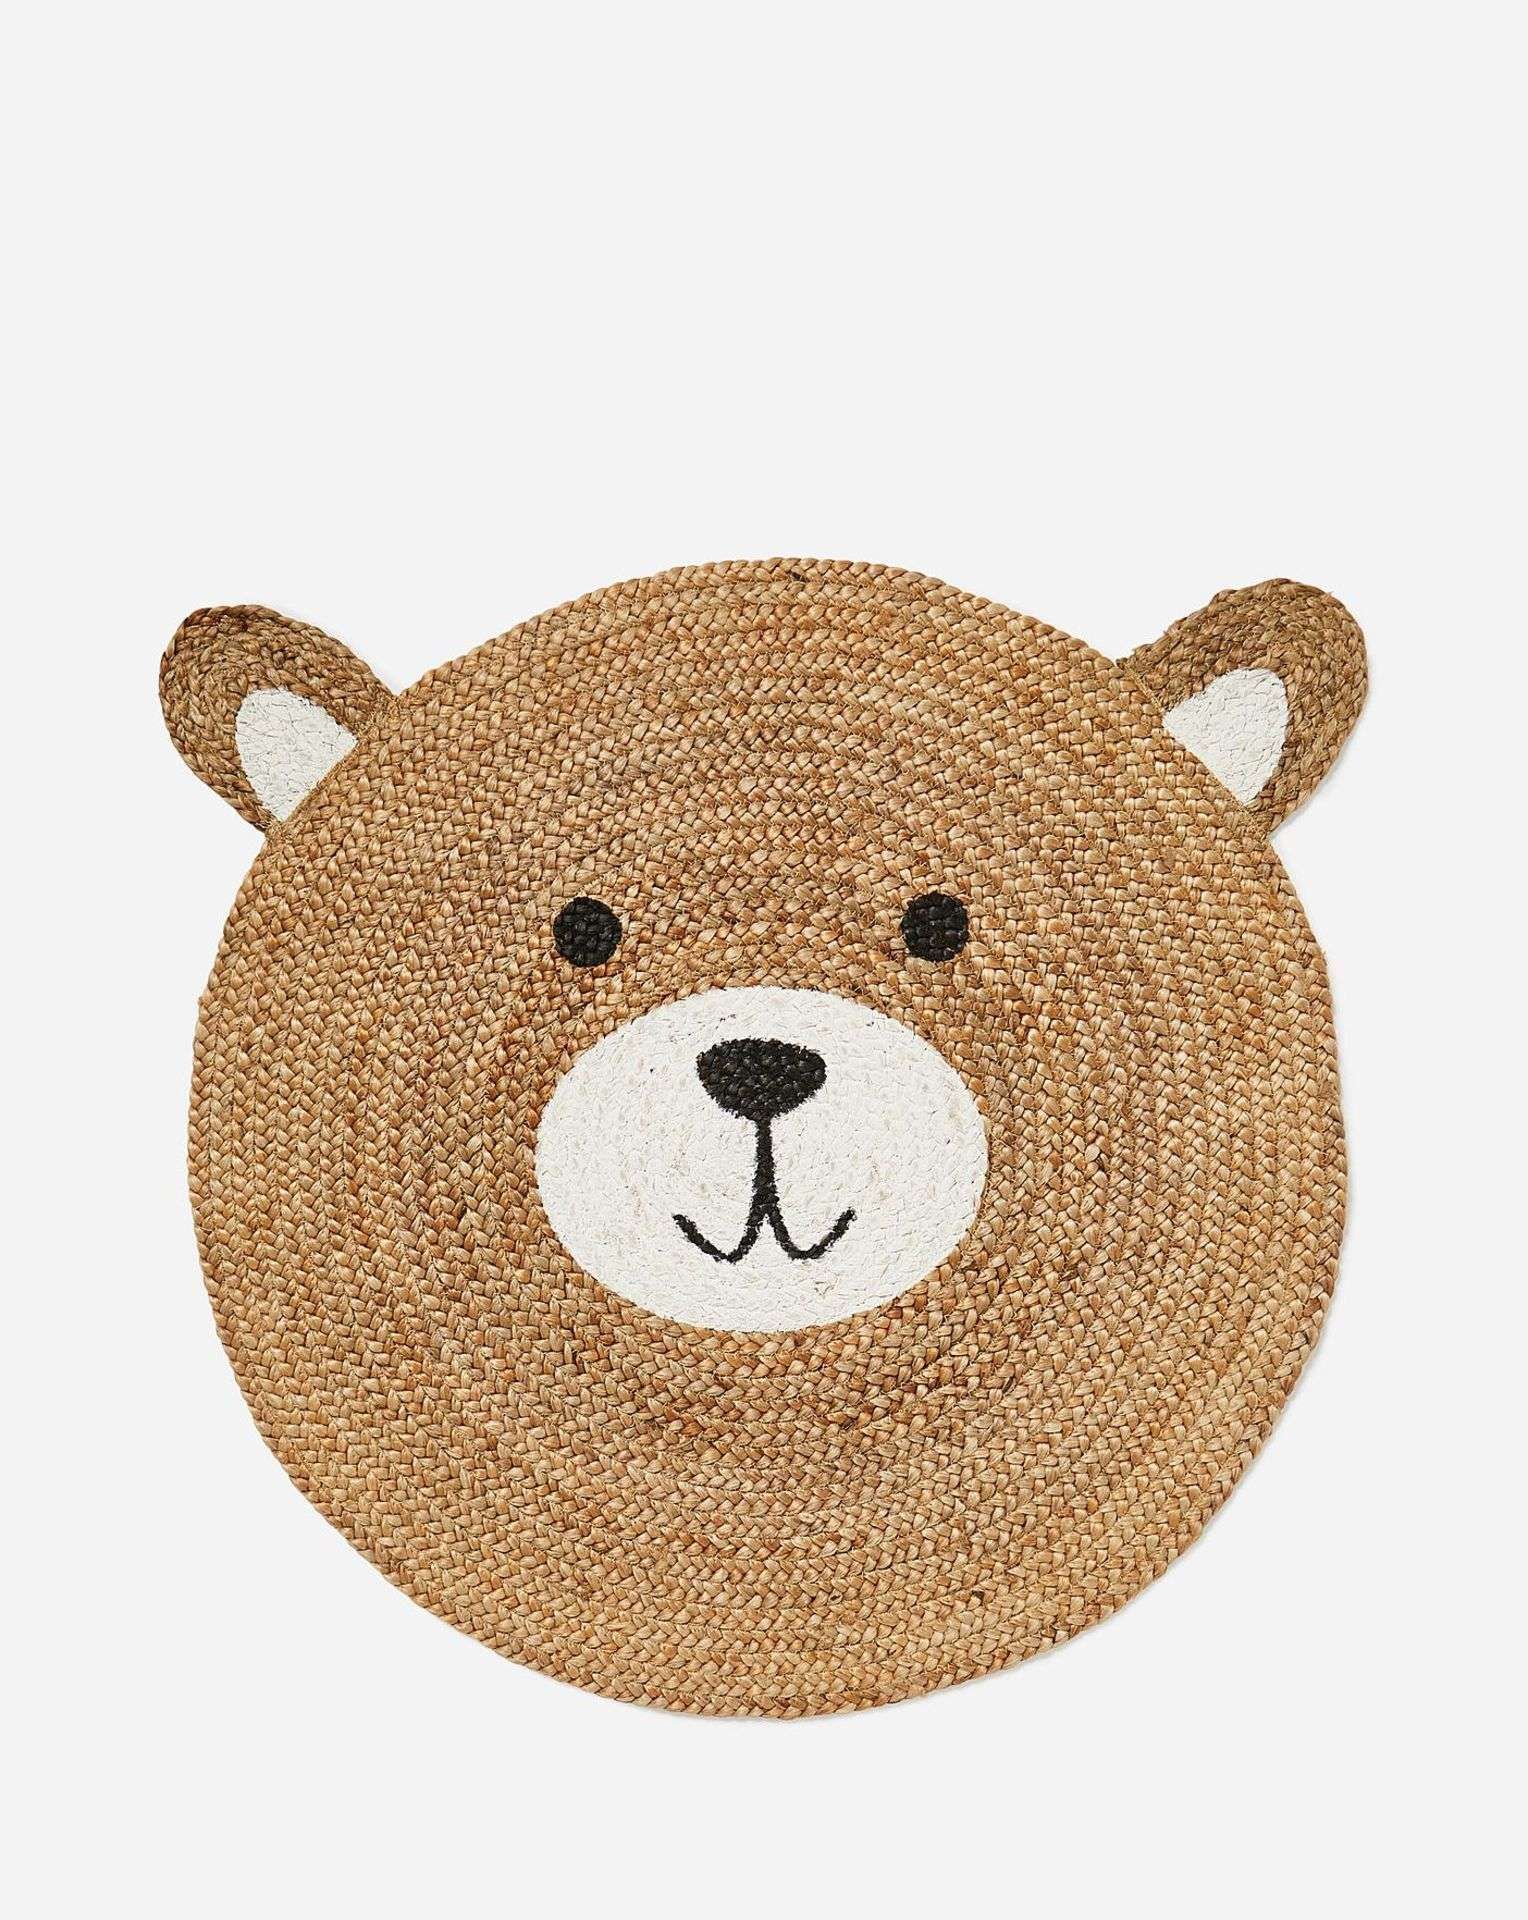 6 X BRAND NEW NATURAL BEAR RUGS R10-1 - Image 3 of 3